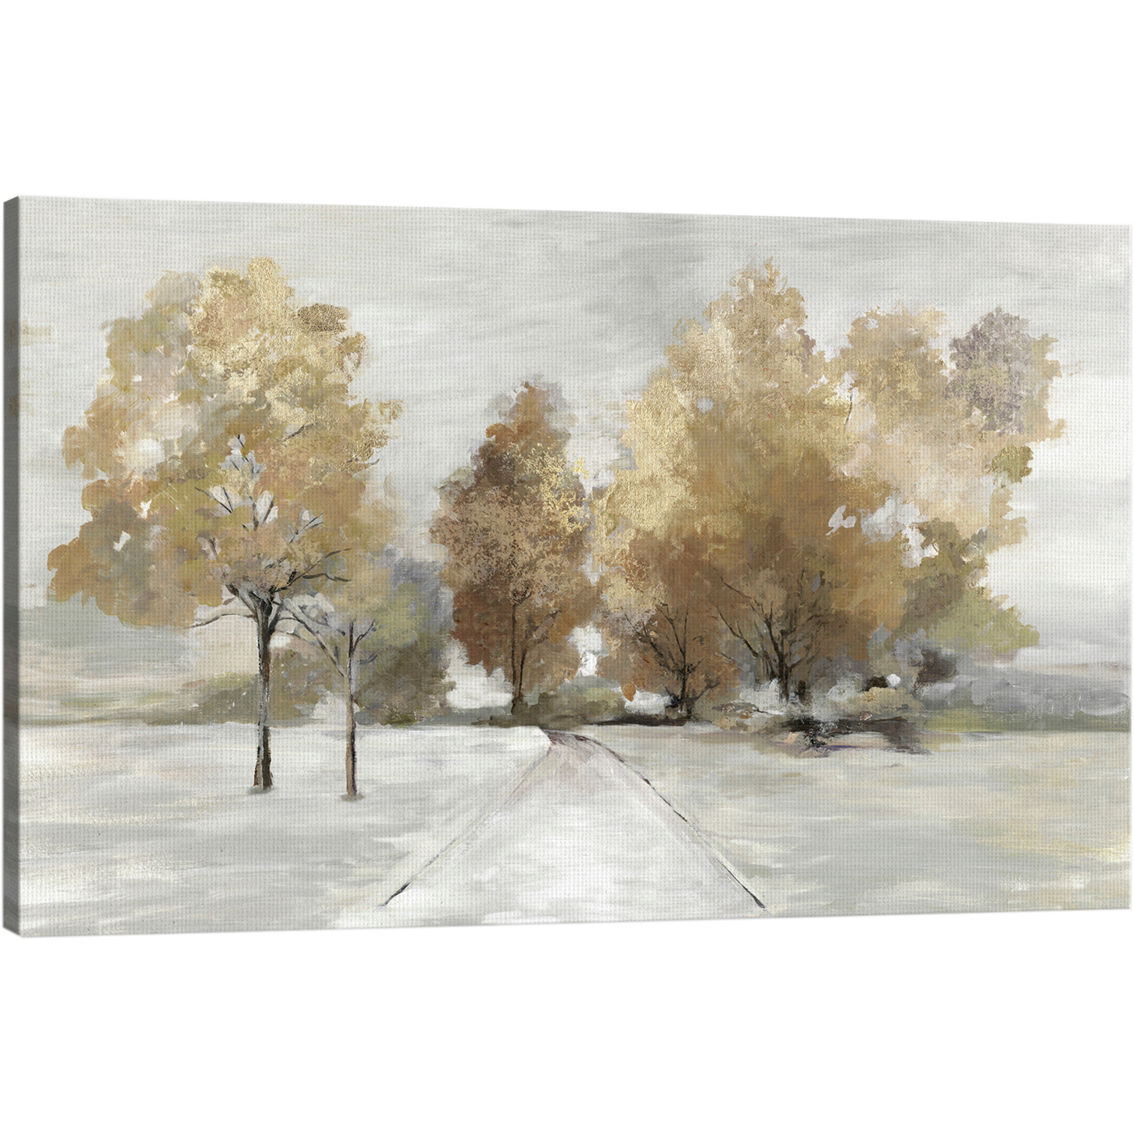 Inkstry Trail Under The Trees Giclee Canvas Print - Image 2 of 3